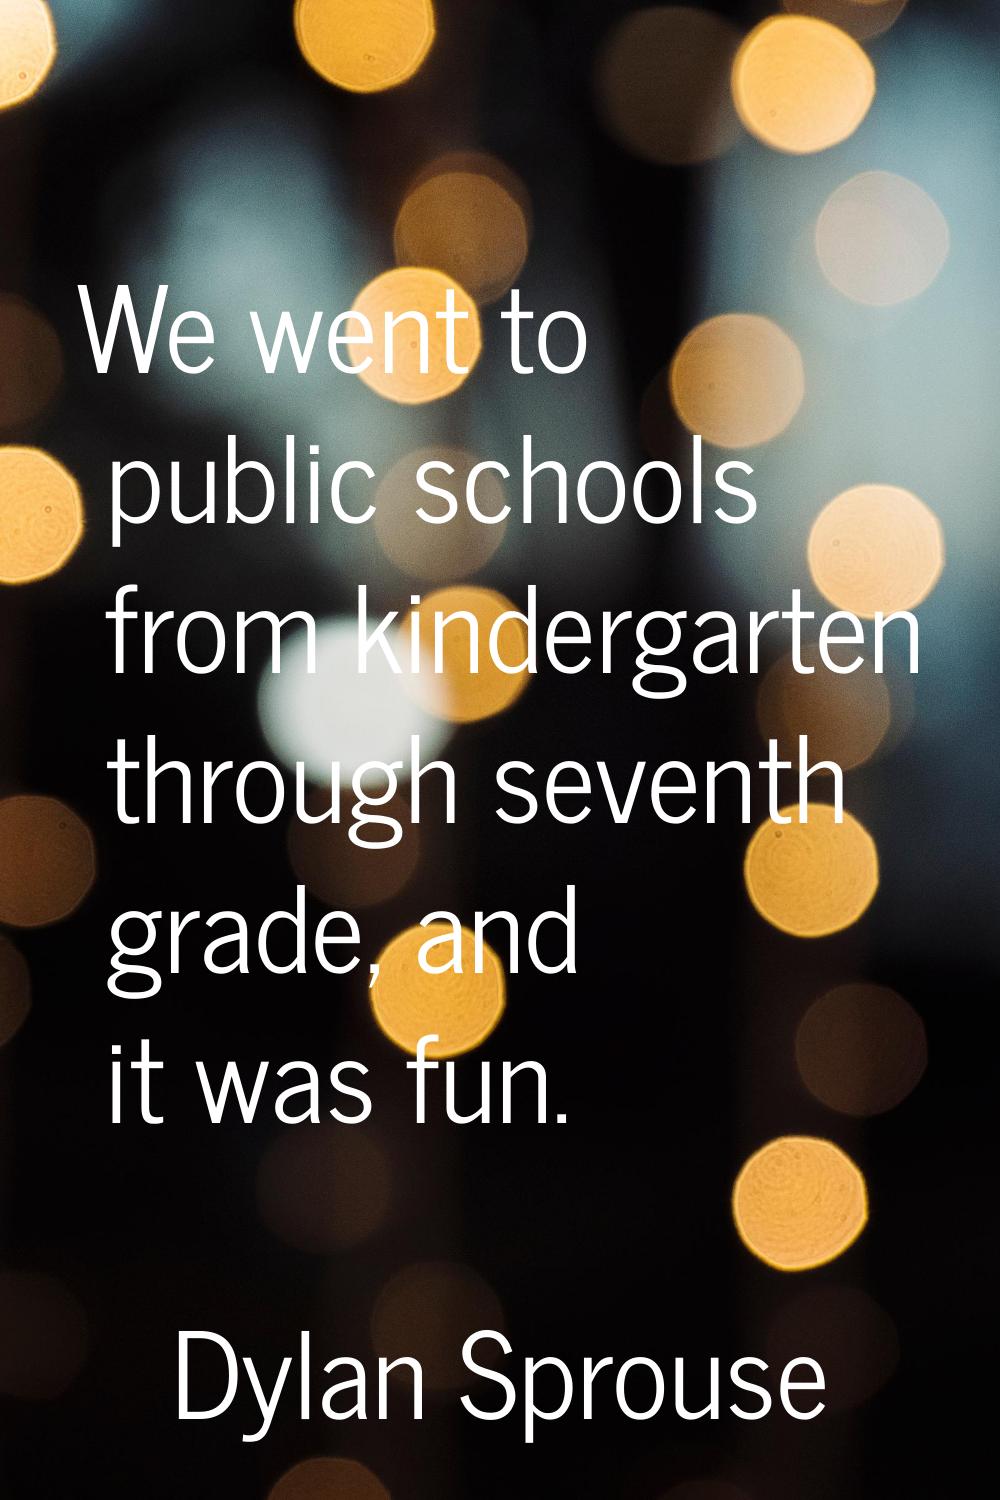 We went to public schools from kindergarten through seventh grade, and it was fun.